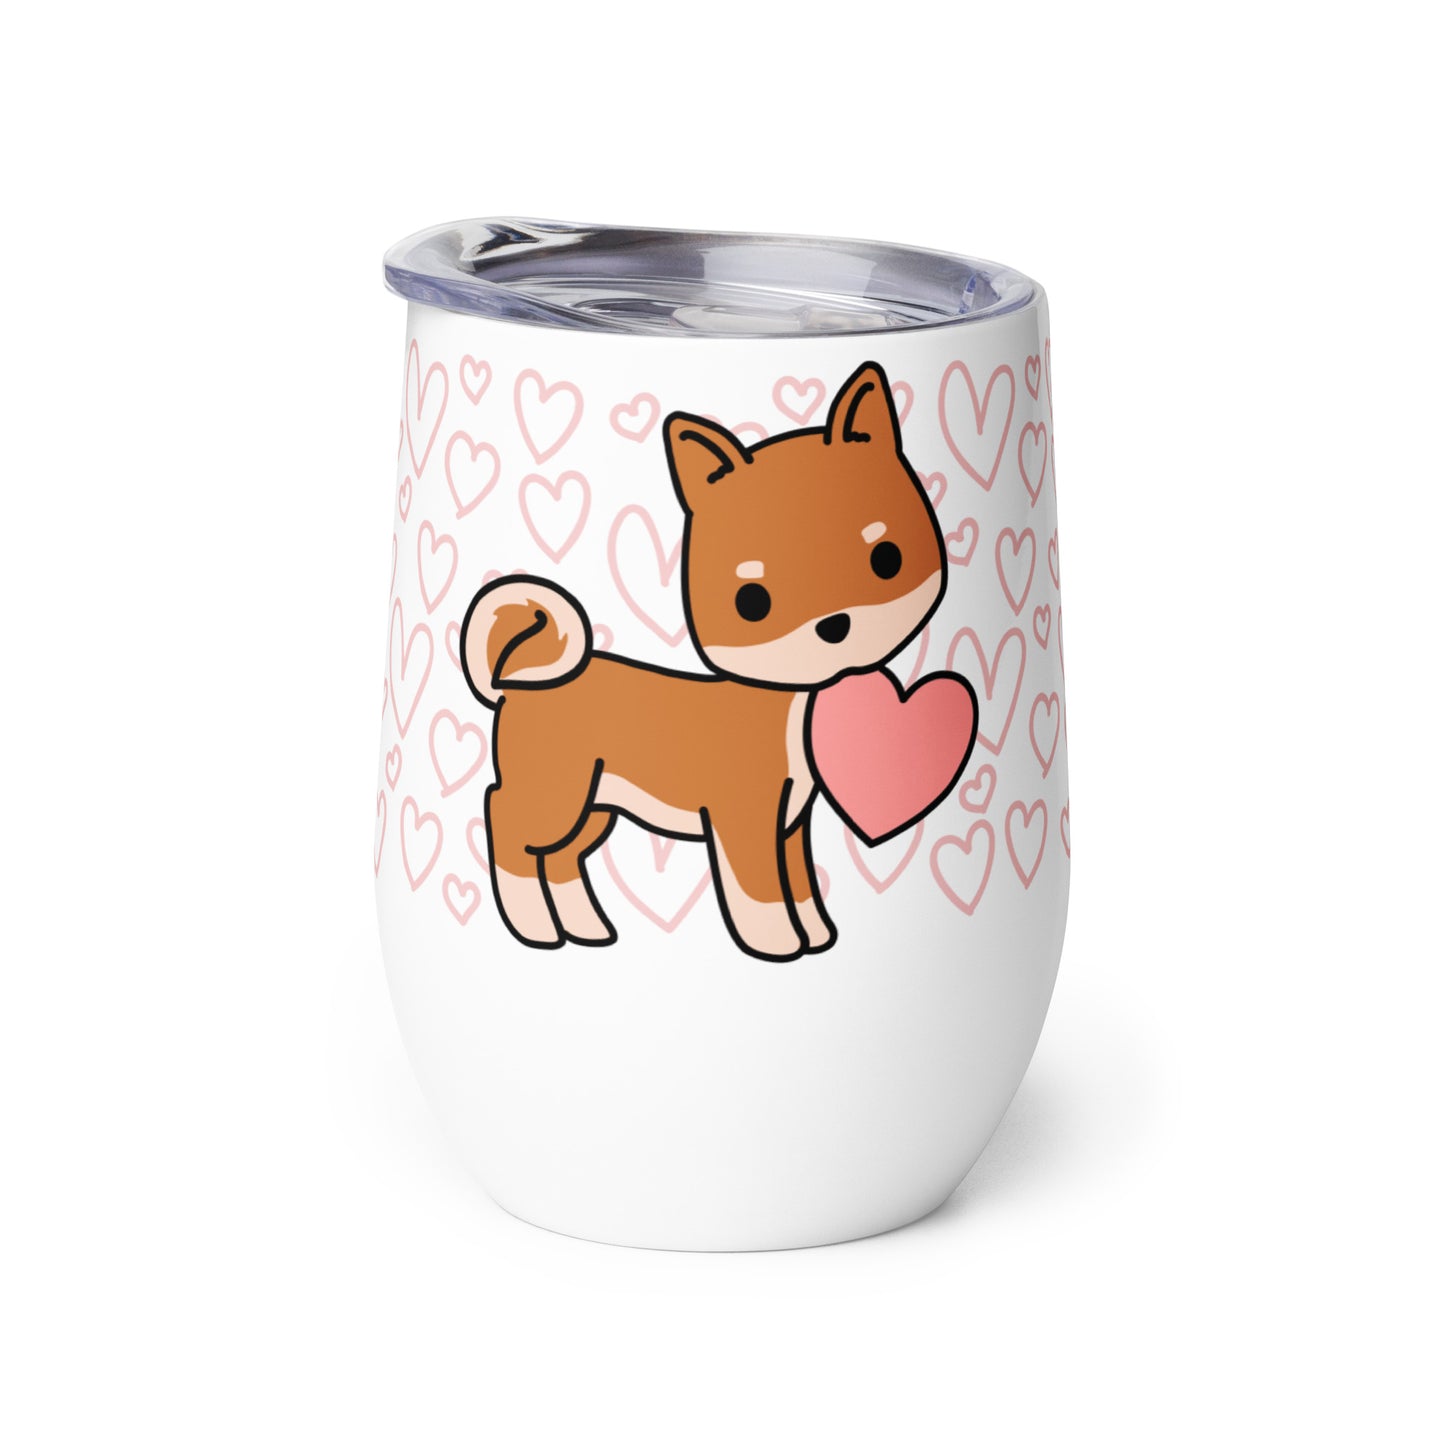 A white metal wine tumbler with a plastic lid. A pattern of hearts wraps around the top half of the tumbler. Centered on the tumbler is a cute, stylized illustration of a Shiba Inu.